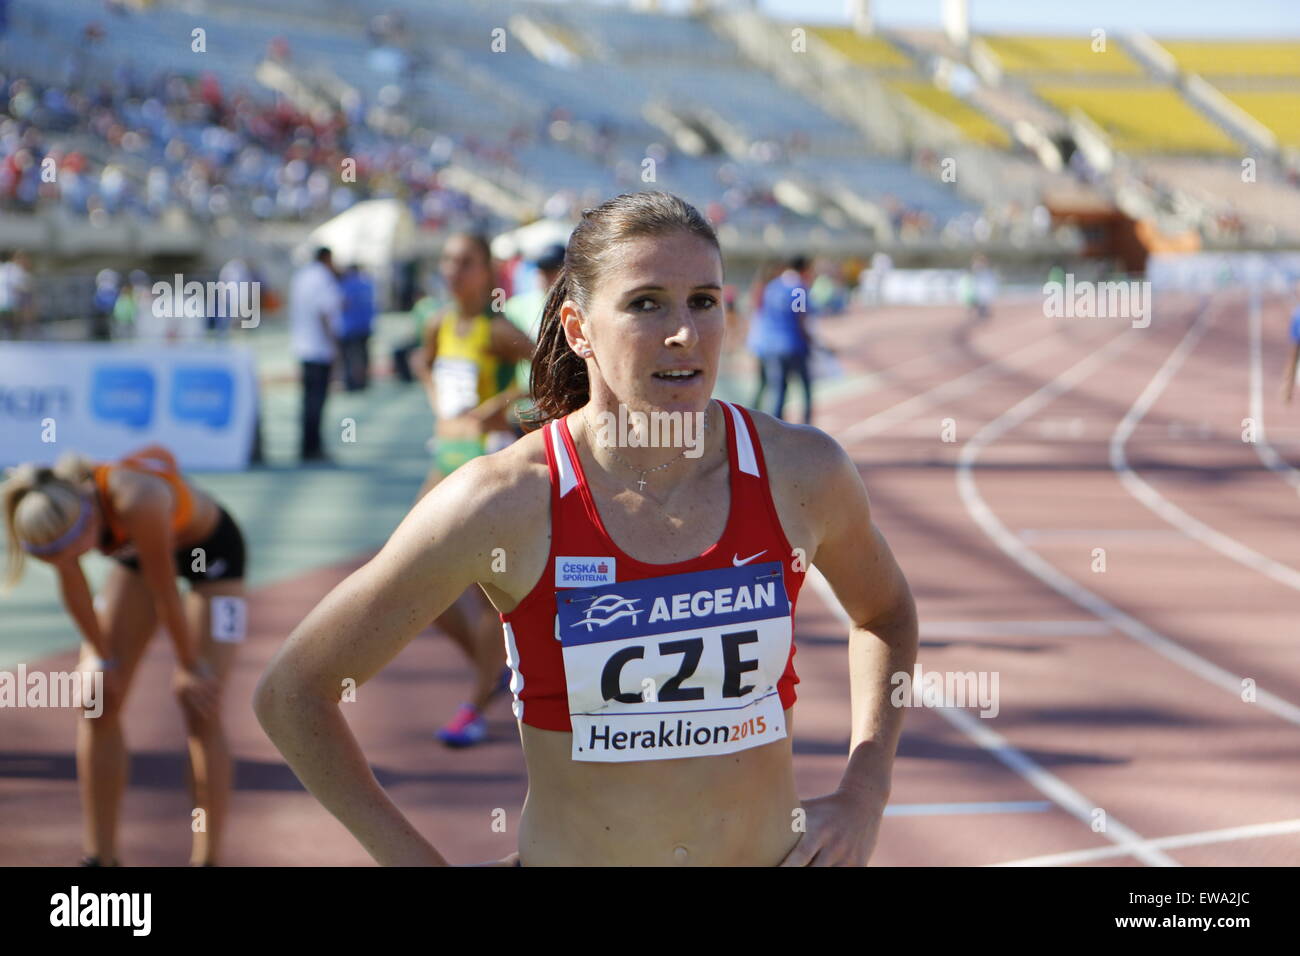 Heraklion, Greece. 20th June, 2015. Czech 400 metres hurdles runner Zuzana Hejnová, the winner oft the second heat is pictured after the race at the 2015 European Athletics Team Championships 1st League. The first day of the 2015 European Athletics Team Championships First League saw 21 events with 1 athlete from each of the 12 participating countries taking place in the Pankrition Stadium in Heraklion on Crete. © Michael Debets/Pacific Press/Alamy Live News Stock Photo